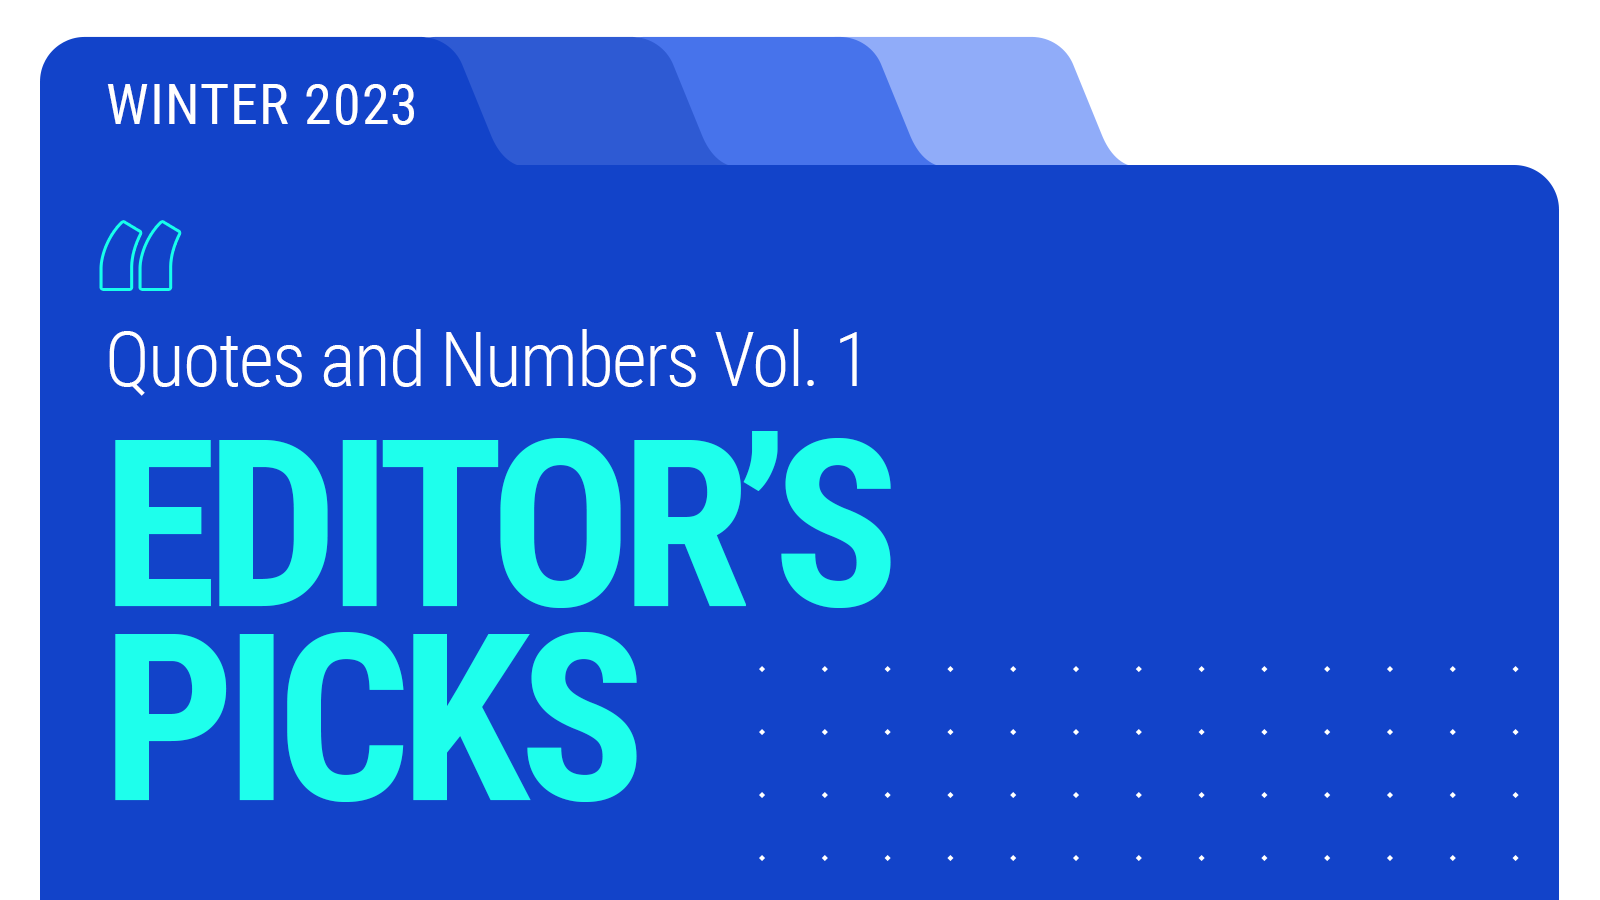 Editor’s Picks: Quotes & Numbers Vol. 1 – Winter 2023